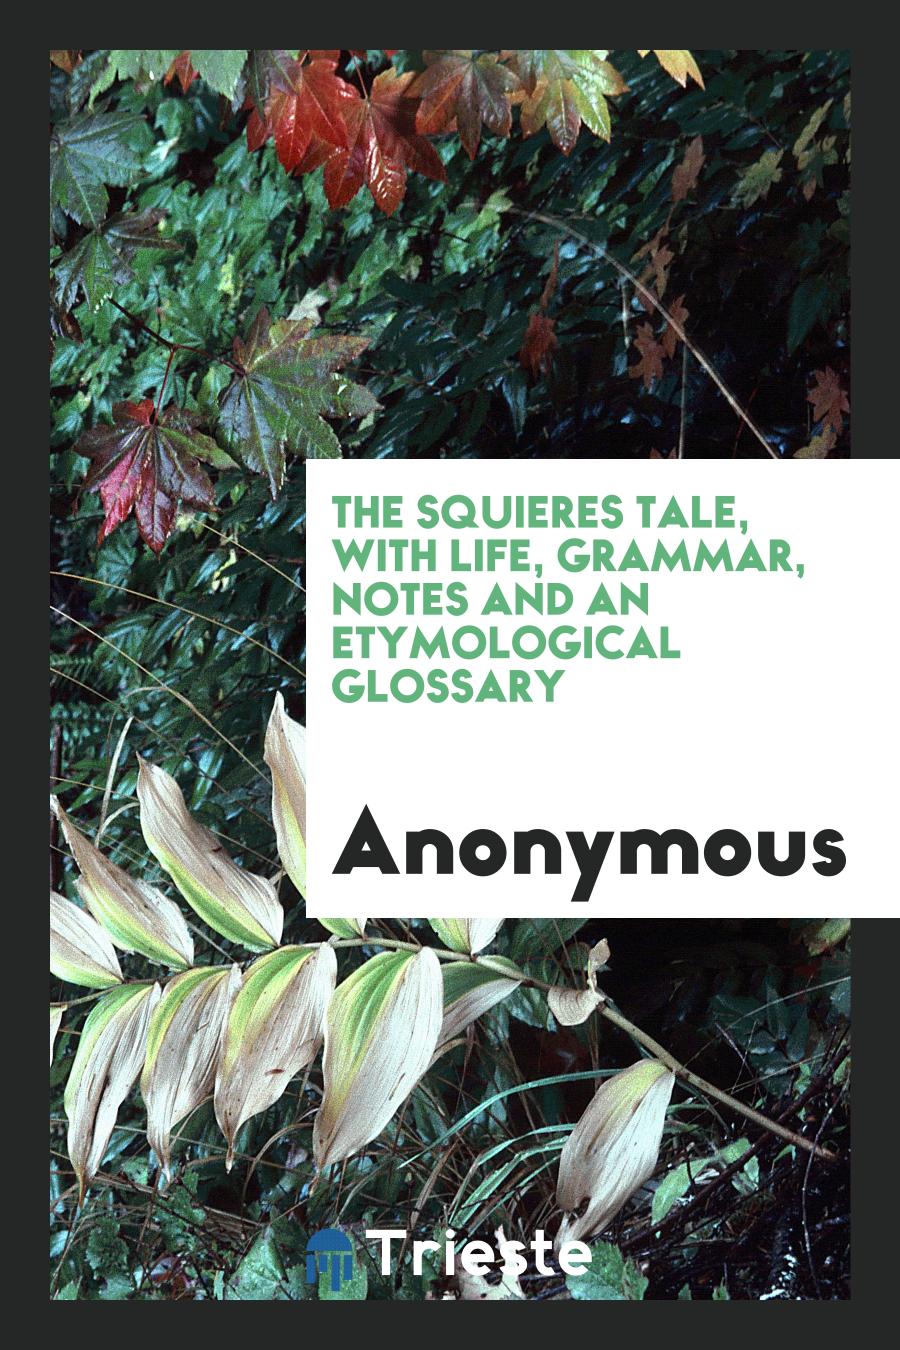 The squieres tale, with life, grammar, notes and an etymological glossary